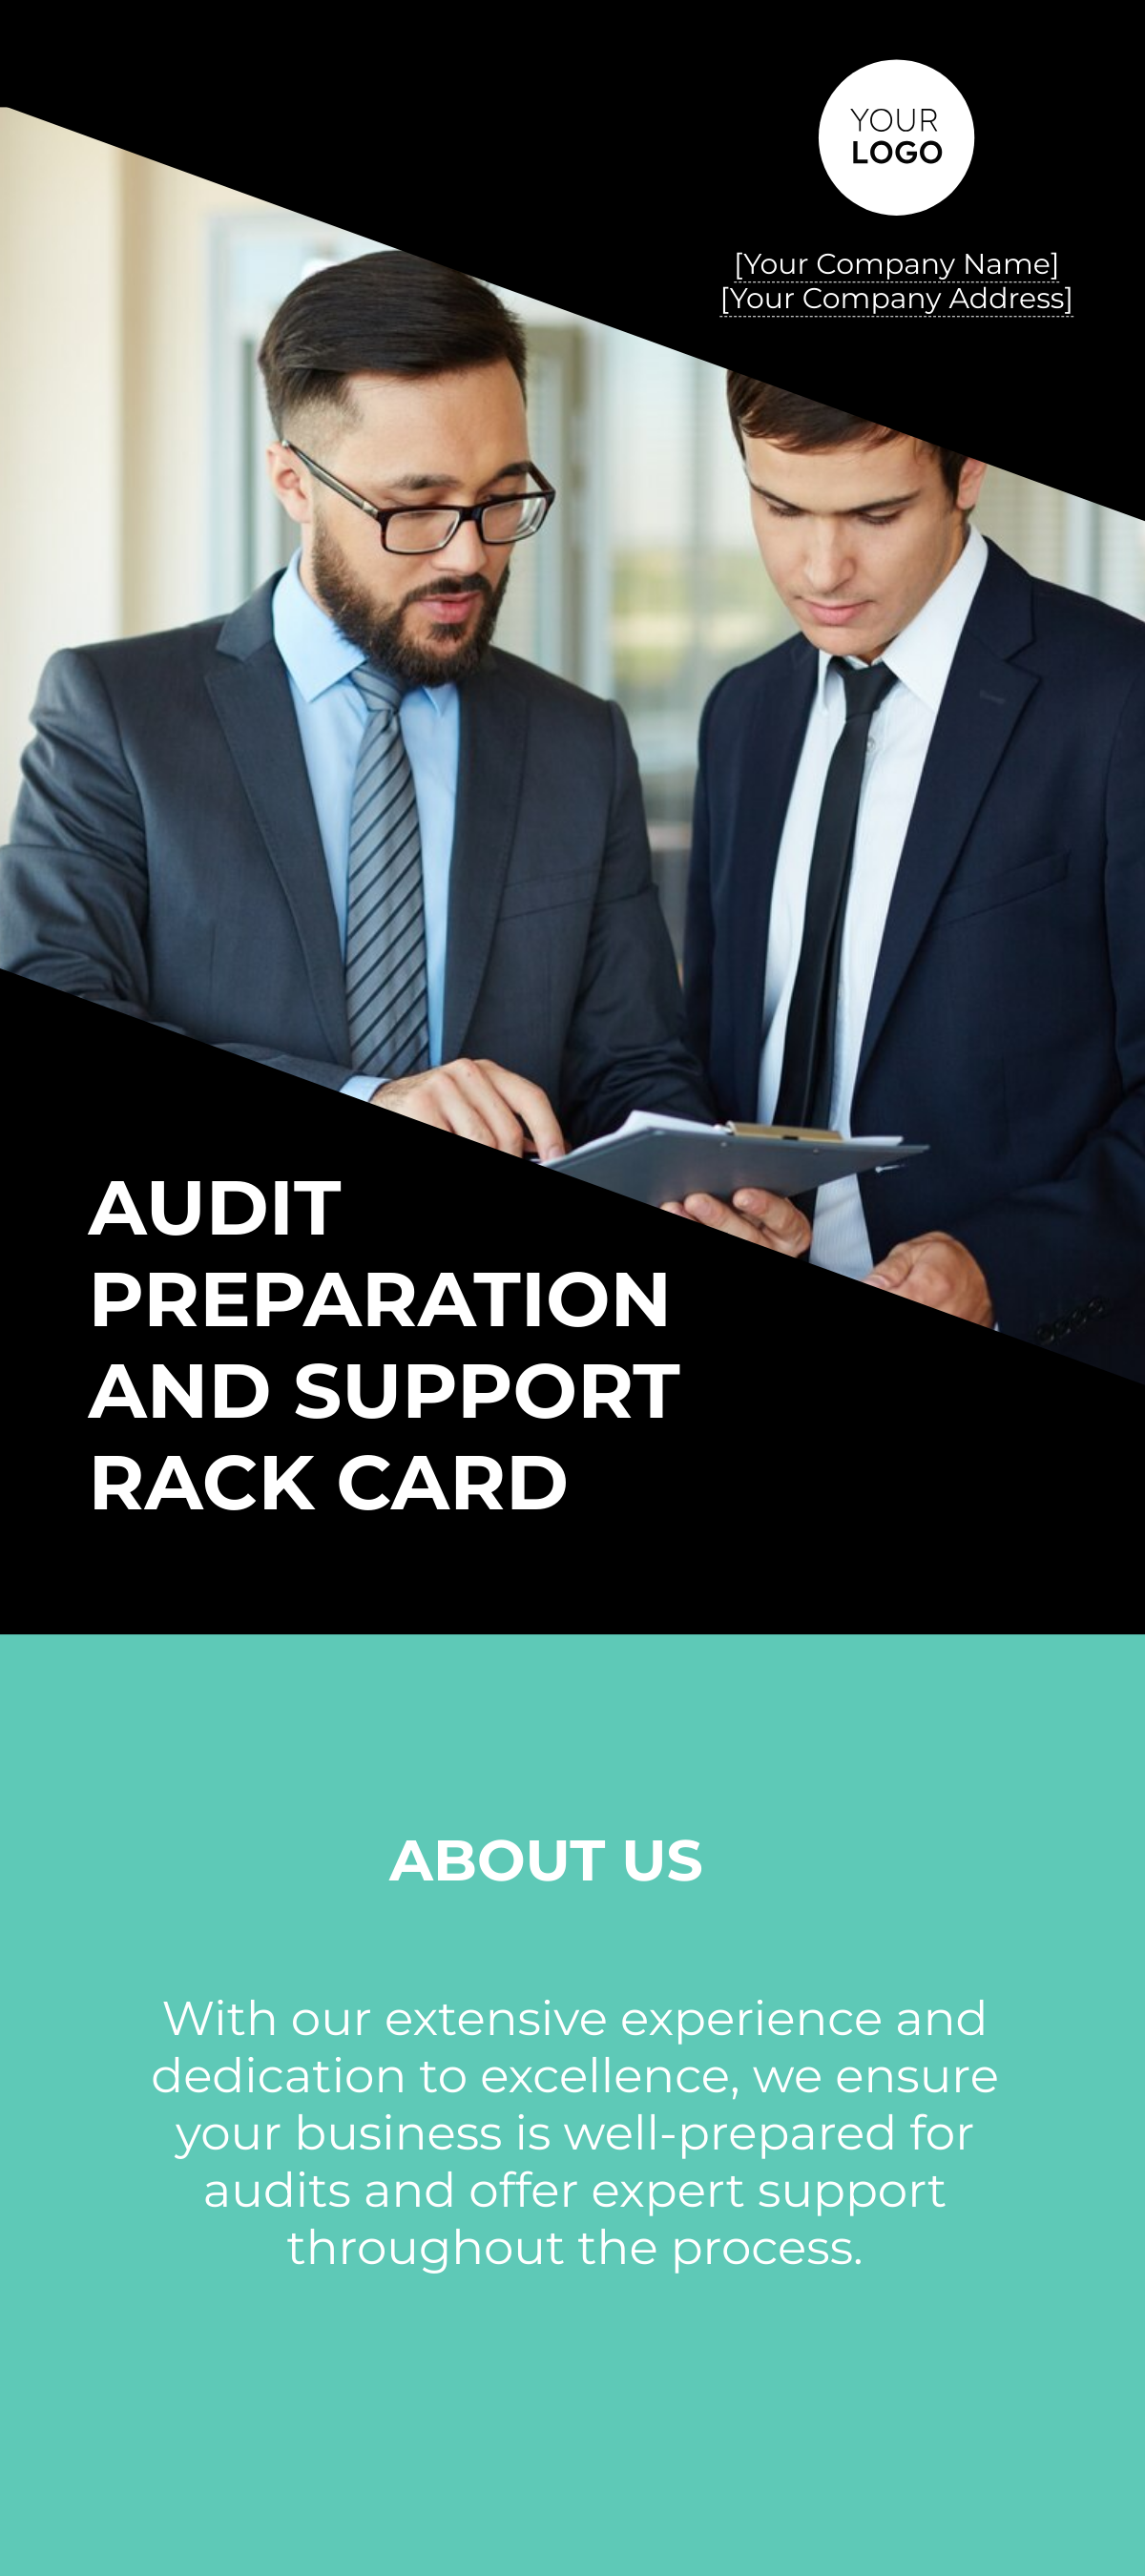 Audit Preparation and Support Rack Card